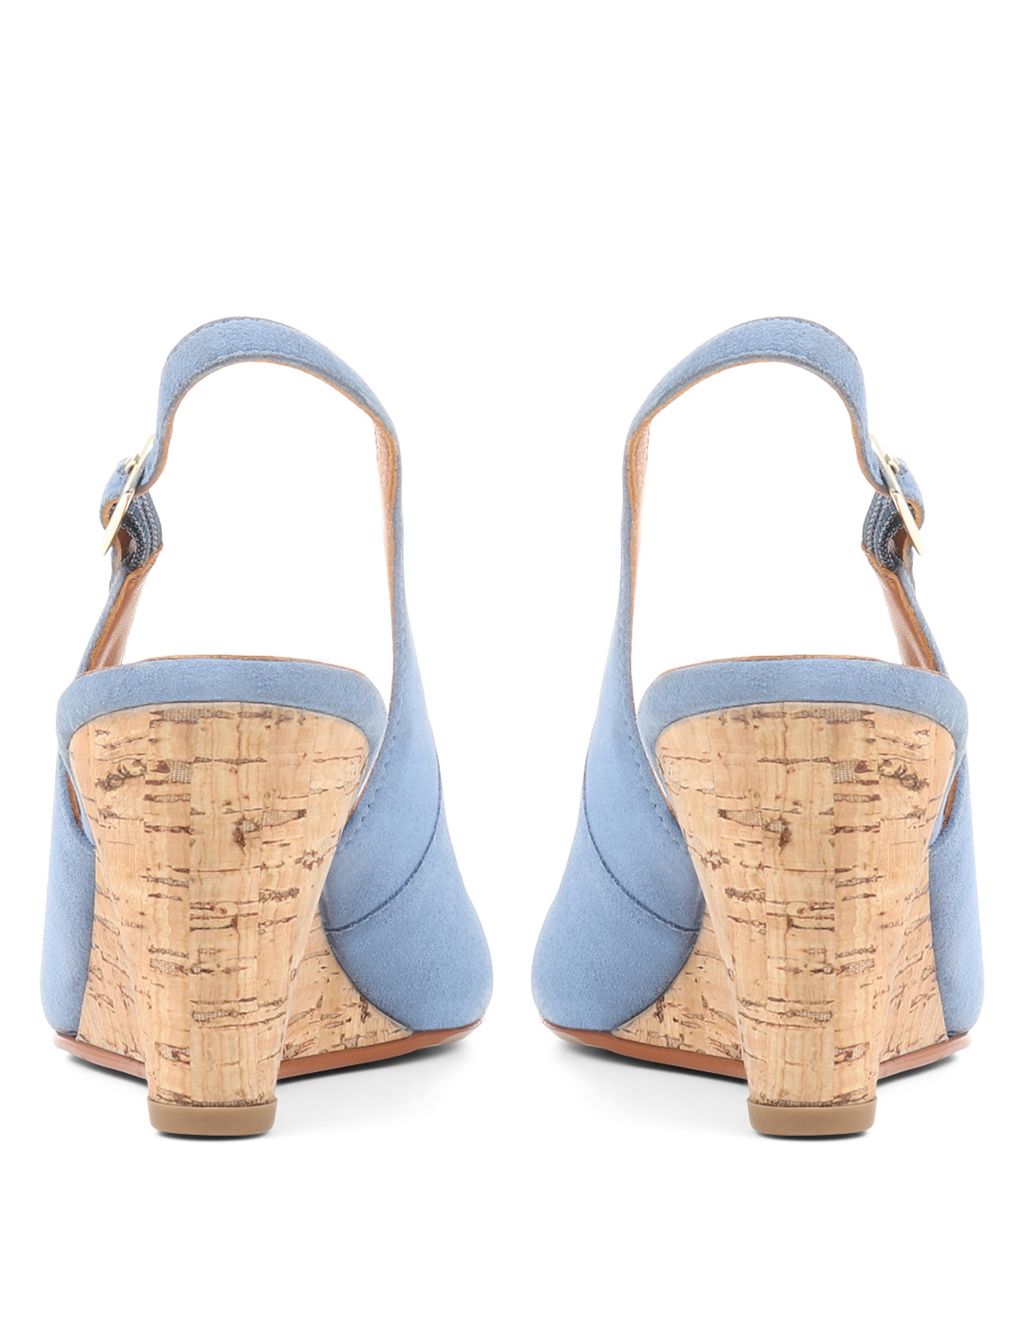 Suede Wedge Slingback Shoes image 3